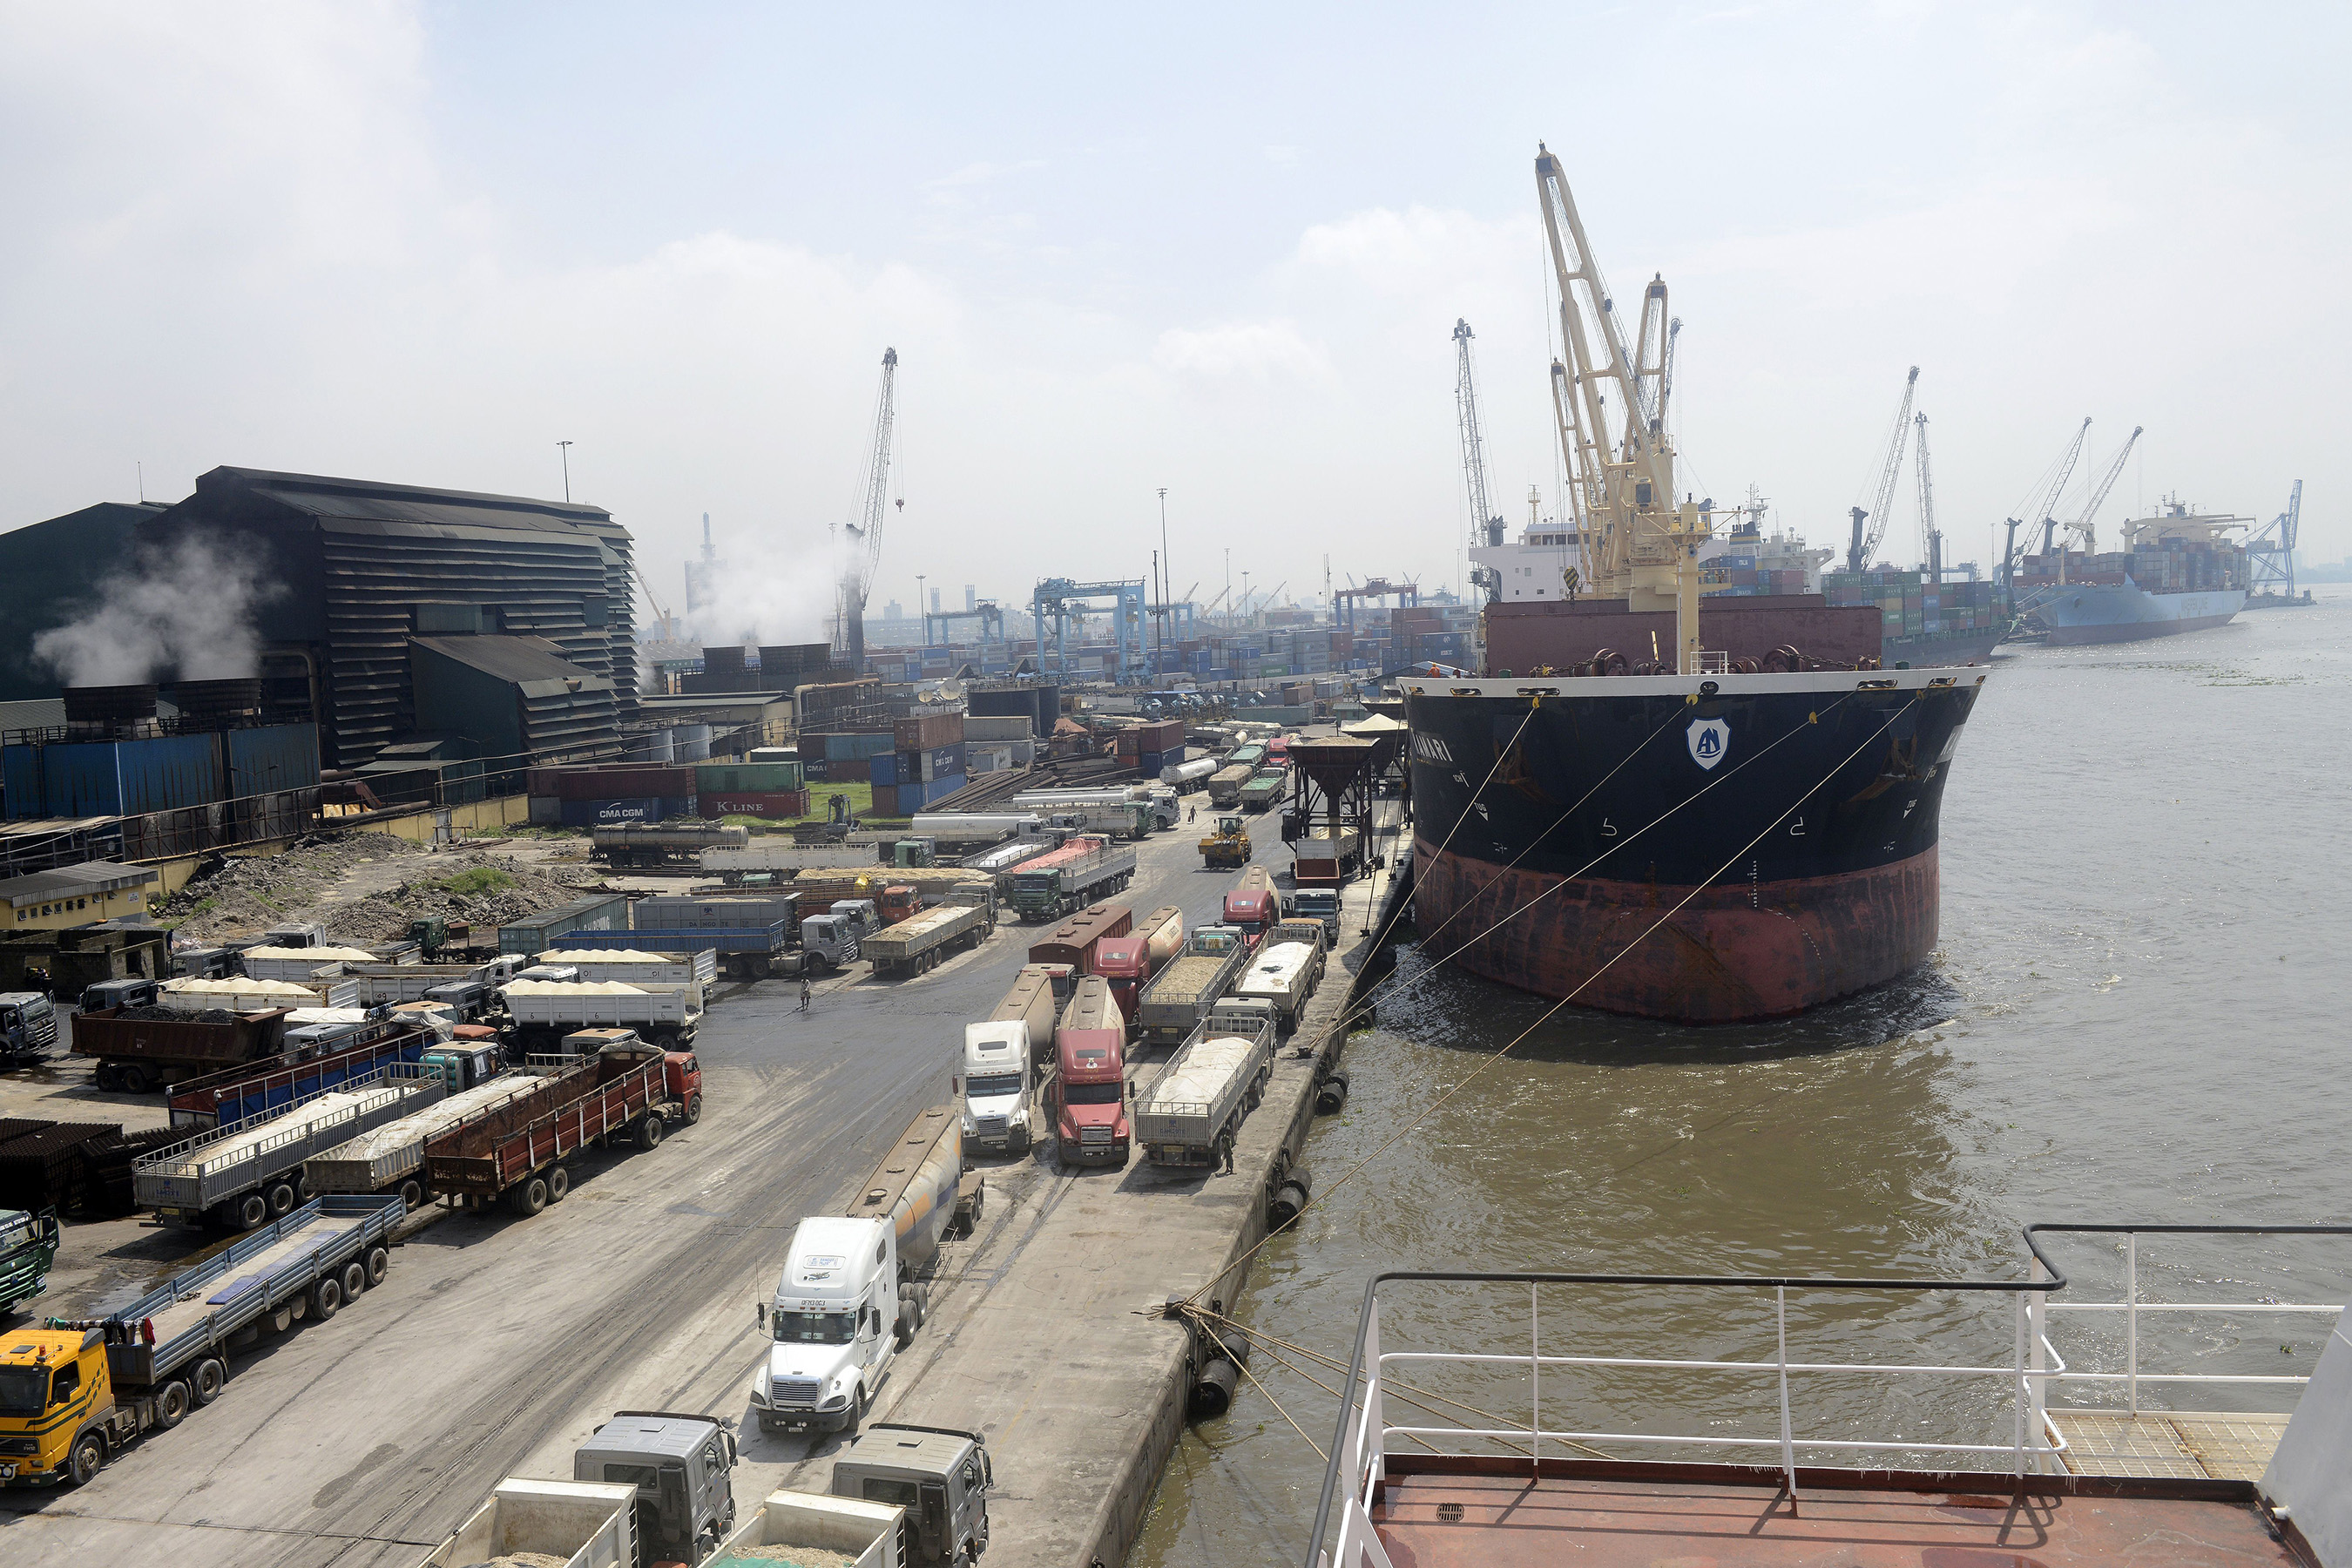 Cargo ships are docked at the Apapa Sea Port in Lagos.